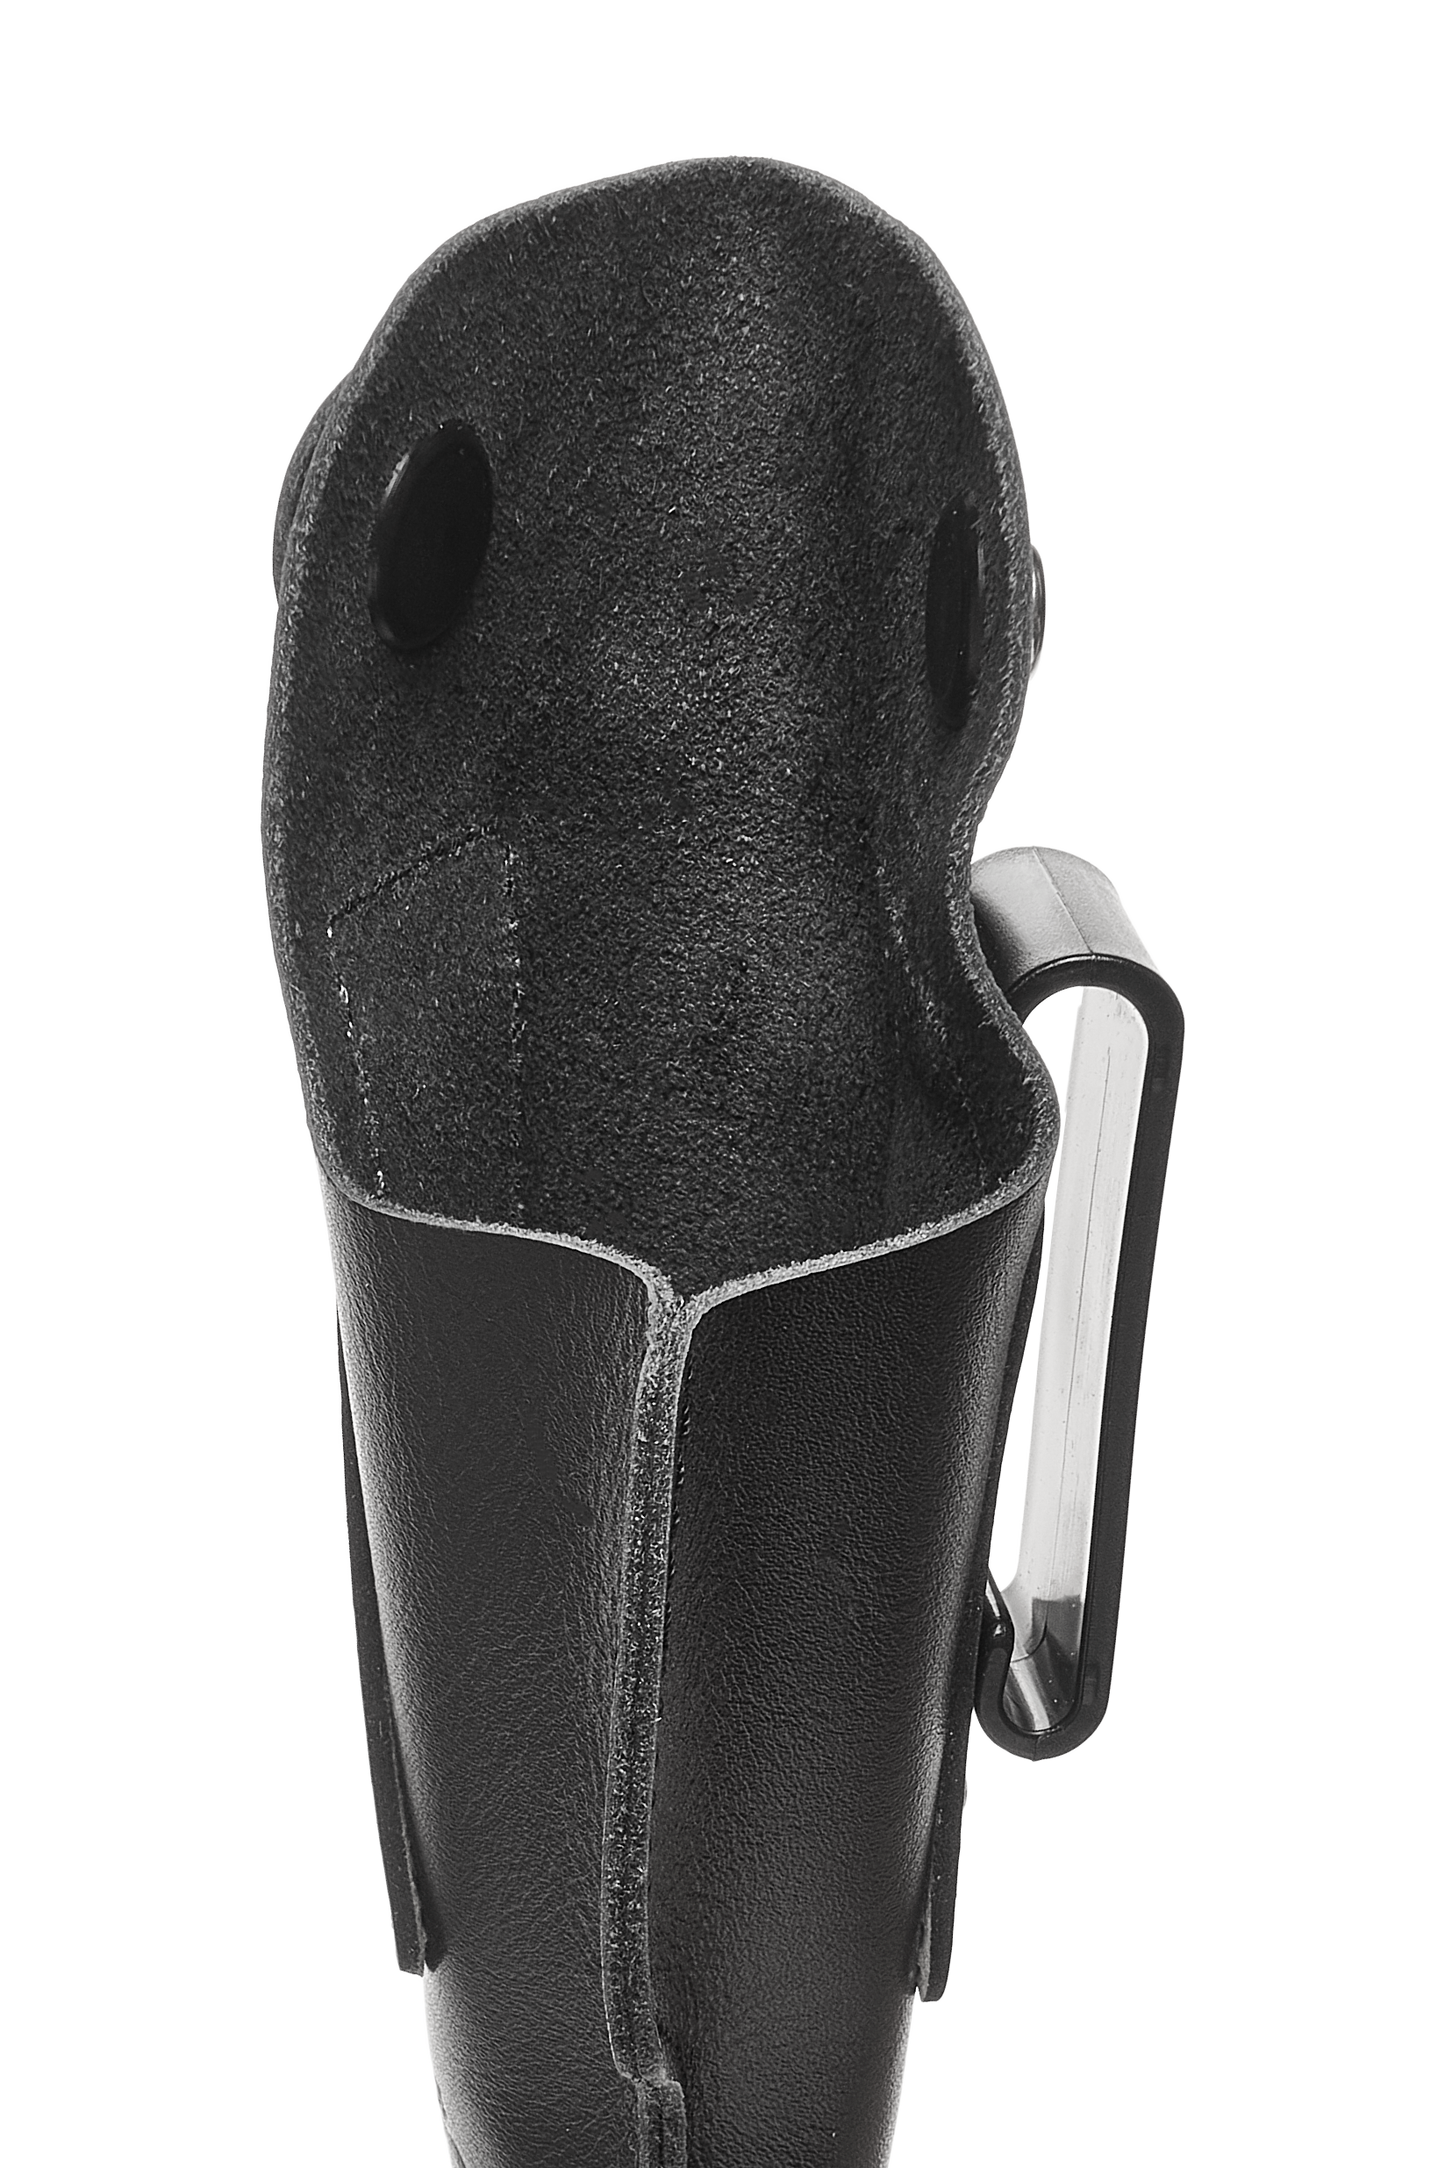 Koltster Leather Holster for Glock 19, IWB Holster for Glock 17 20 21 31 45 | S&W M&P Shield and Similar Sized Handguns, Concealed Carry Genuine Leather Holster with Belt Clip, Black Handmade (KM150)